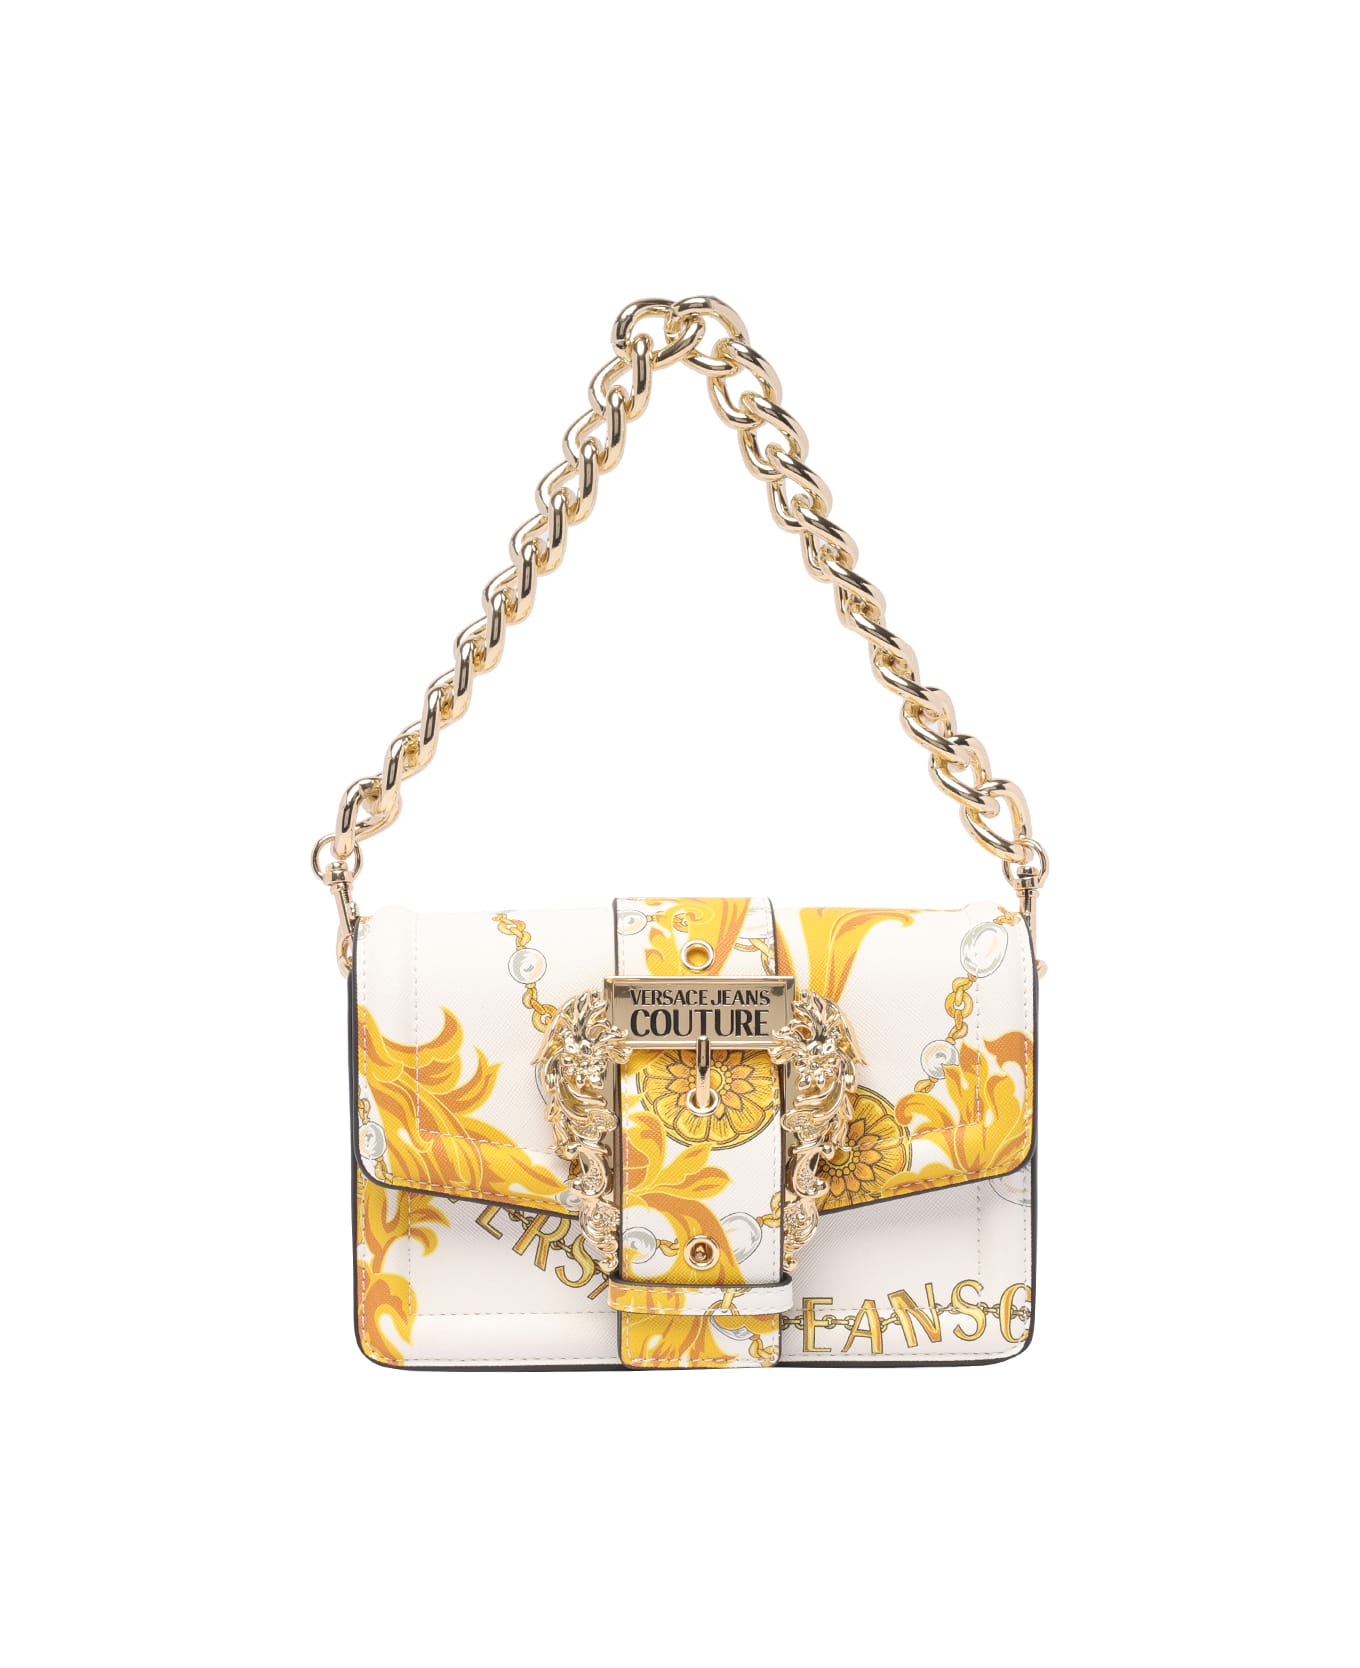 Versace Jeans Couture Shoulder Bag Couture 1 - White